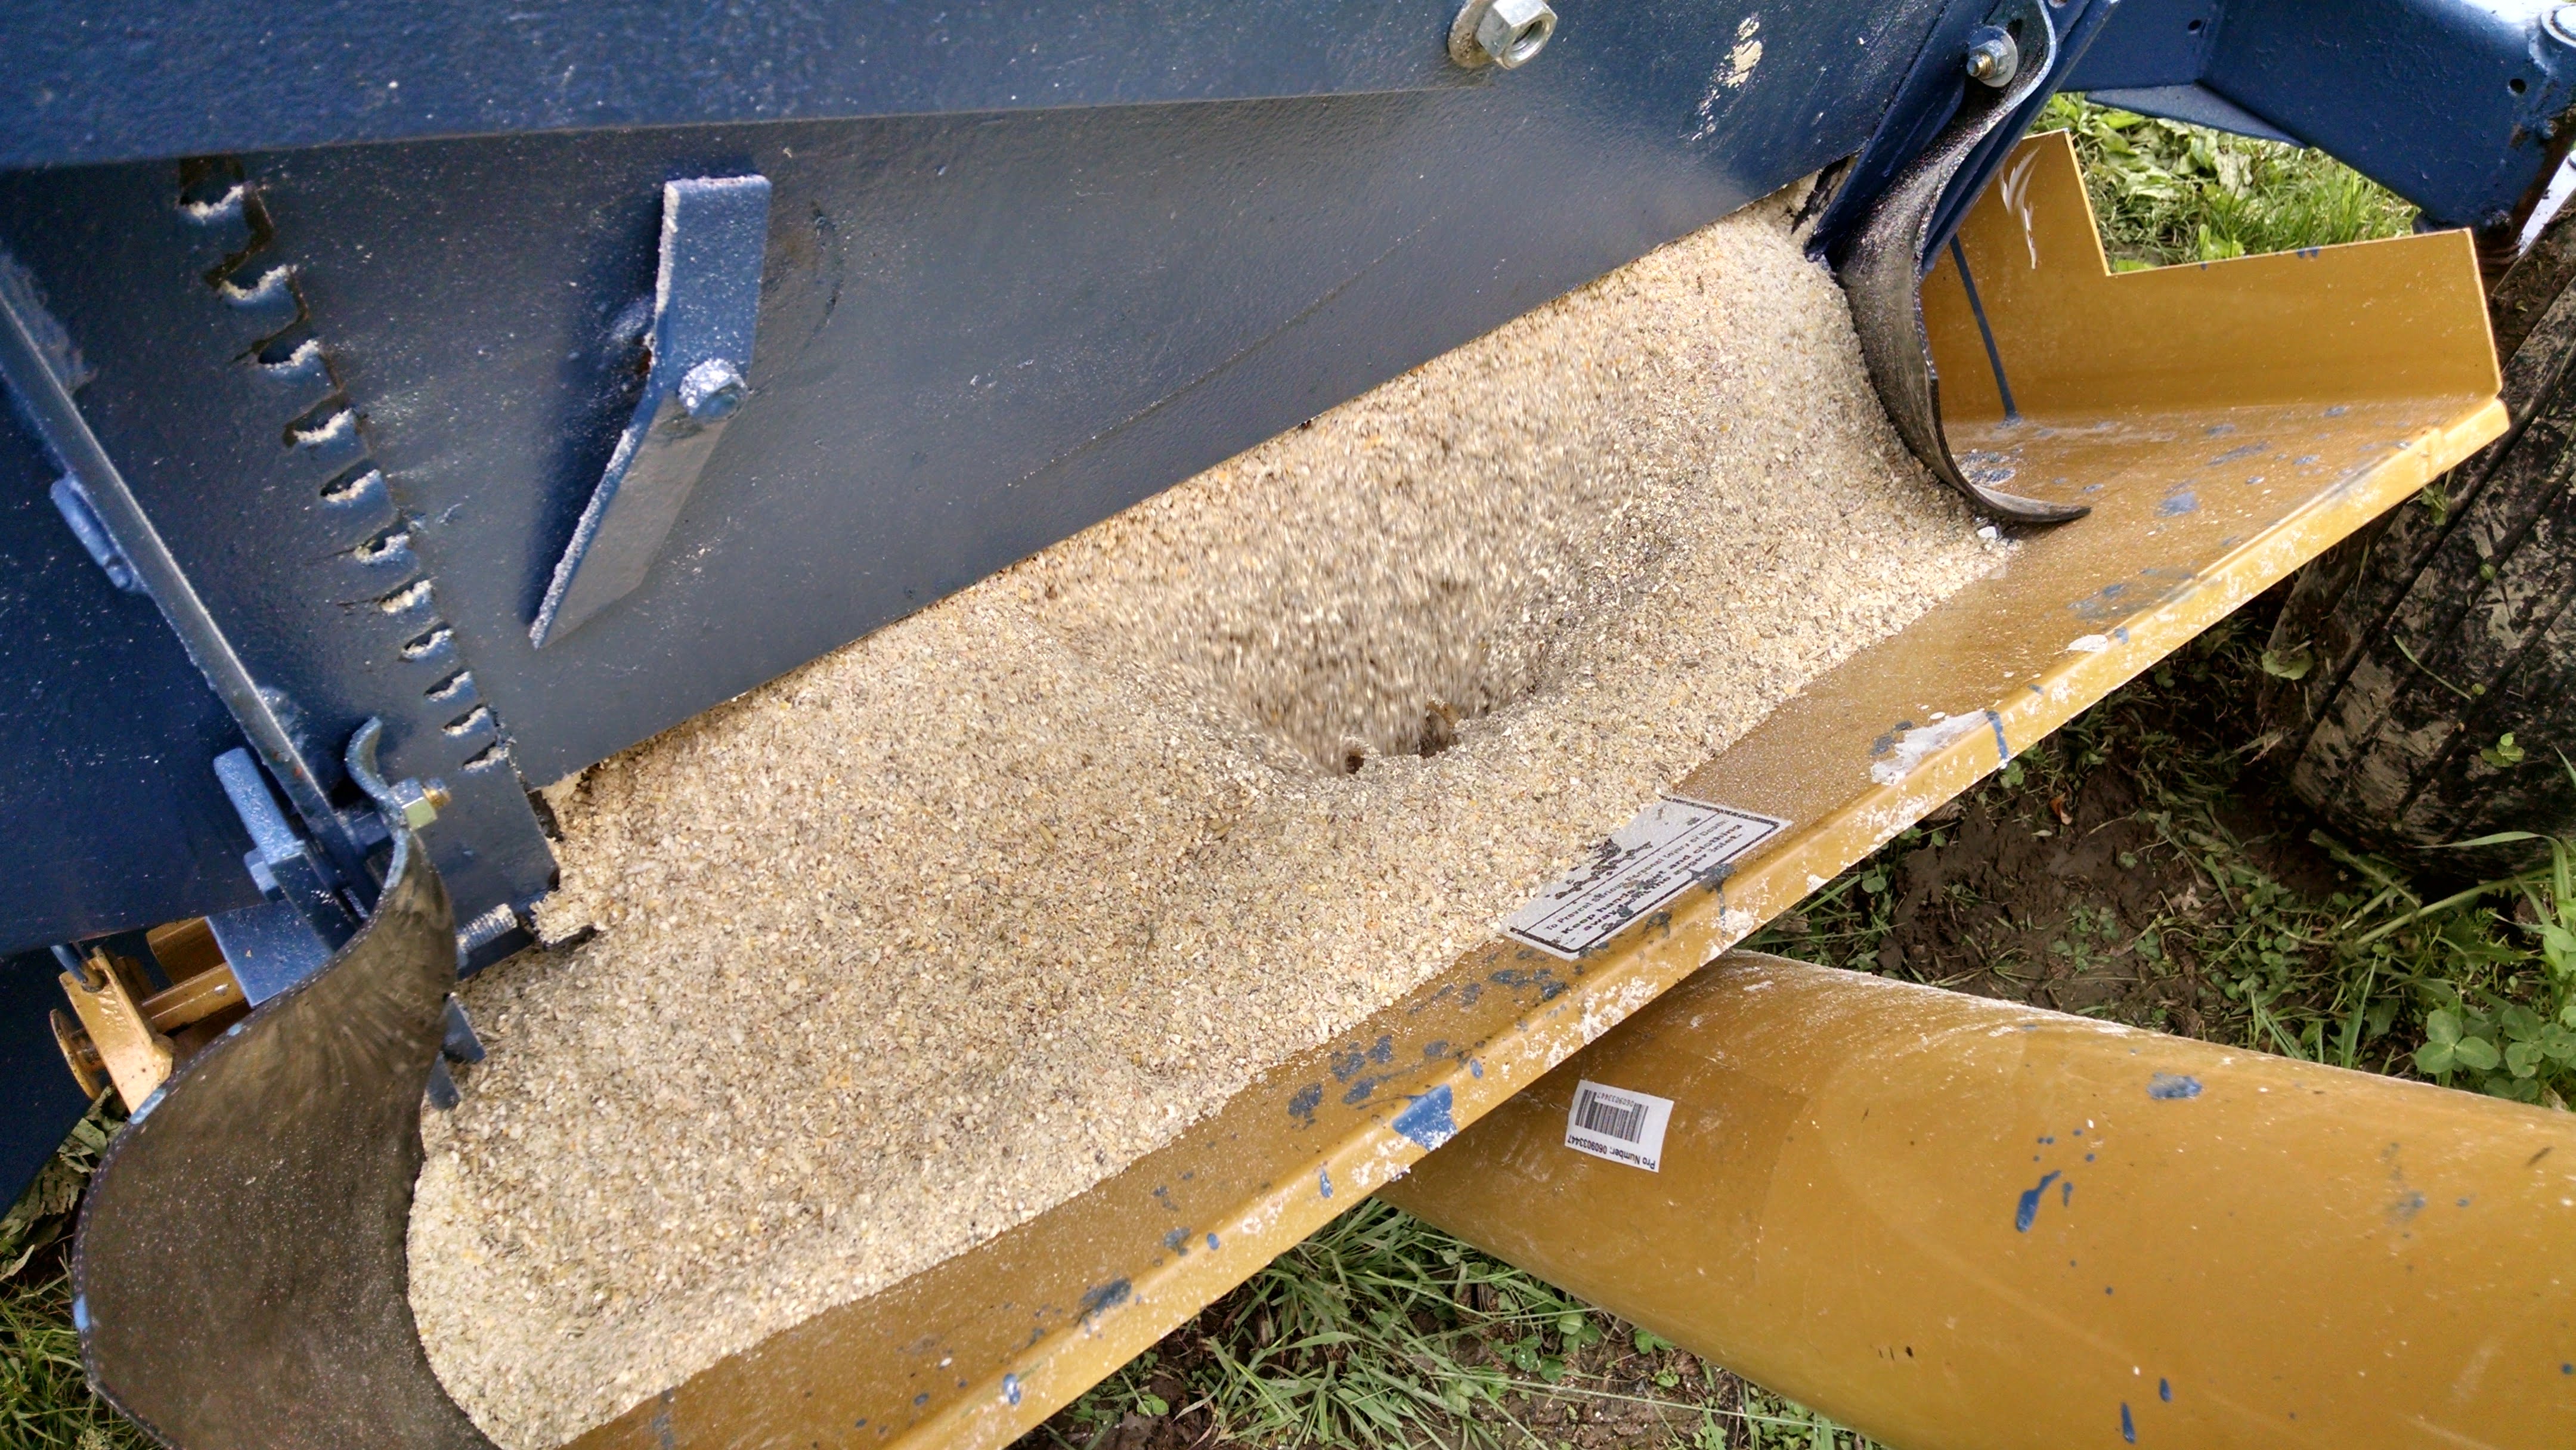 Grain flowing out of the wagon into the auger hopper.  I might add a plywood extension to the hopper to prevent overflow problems